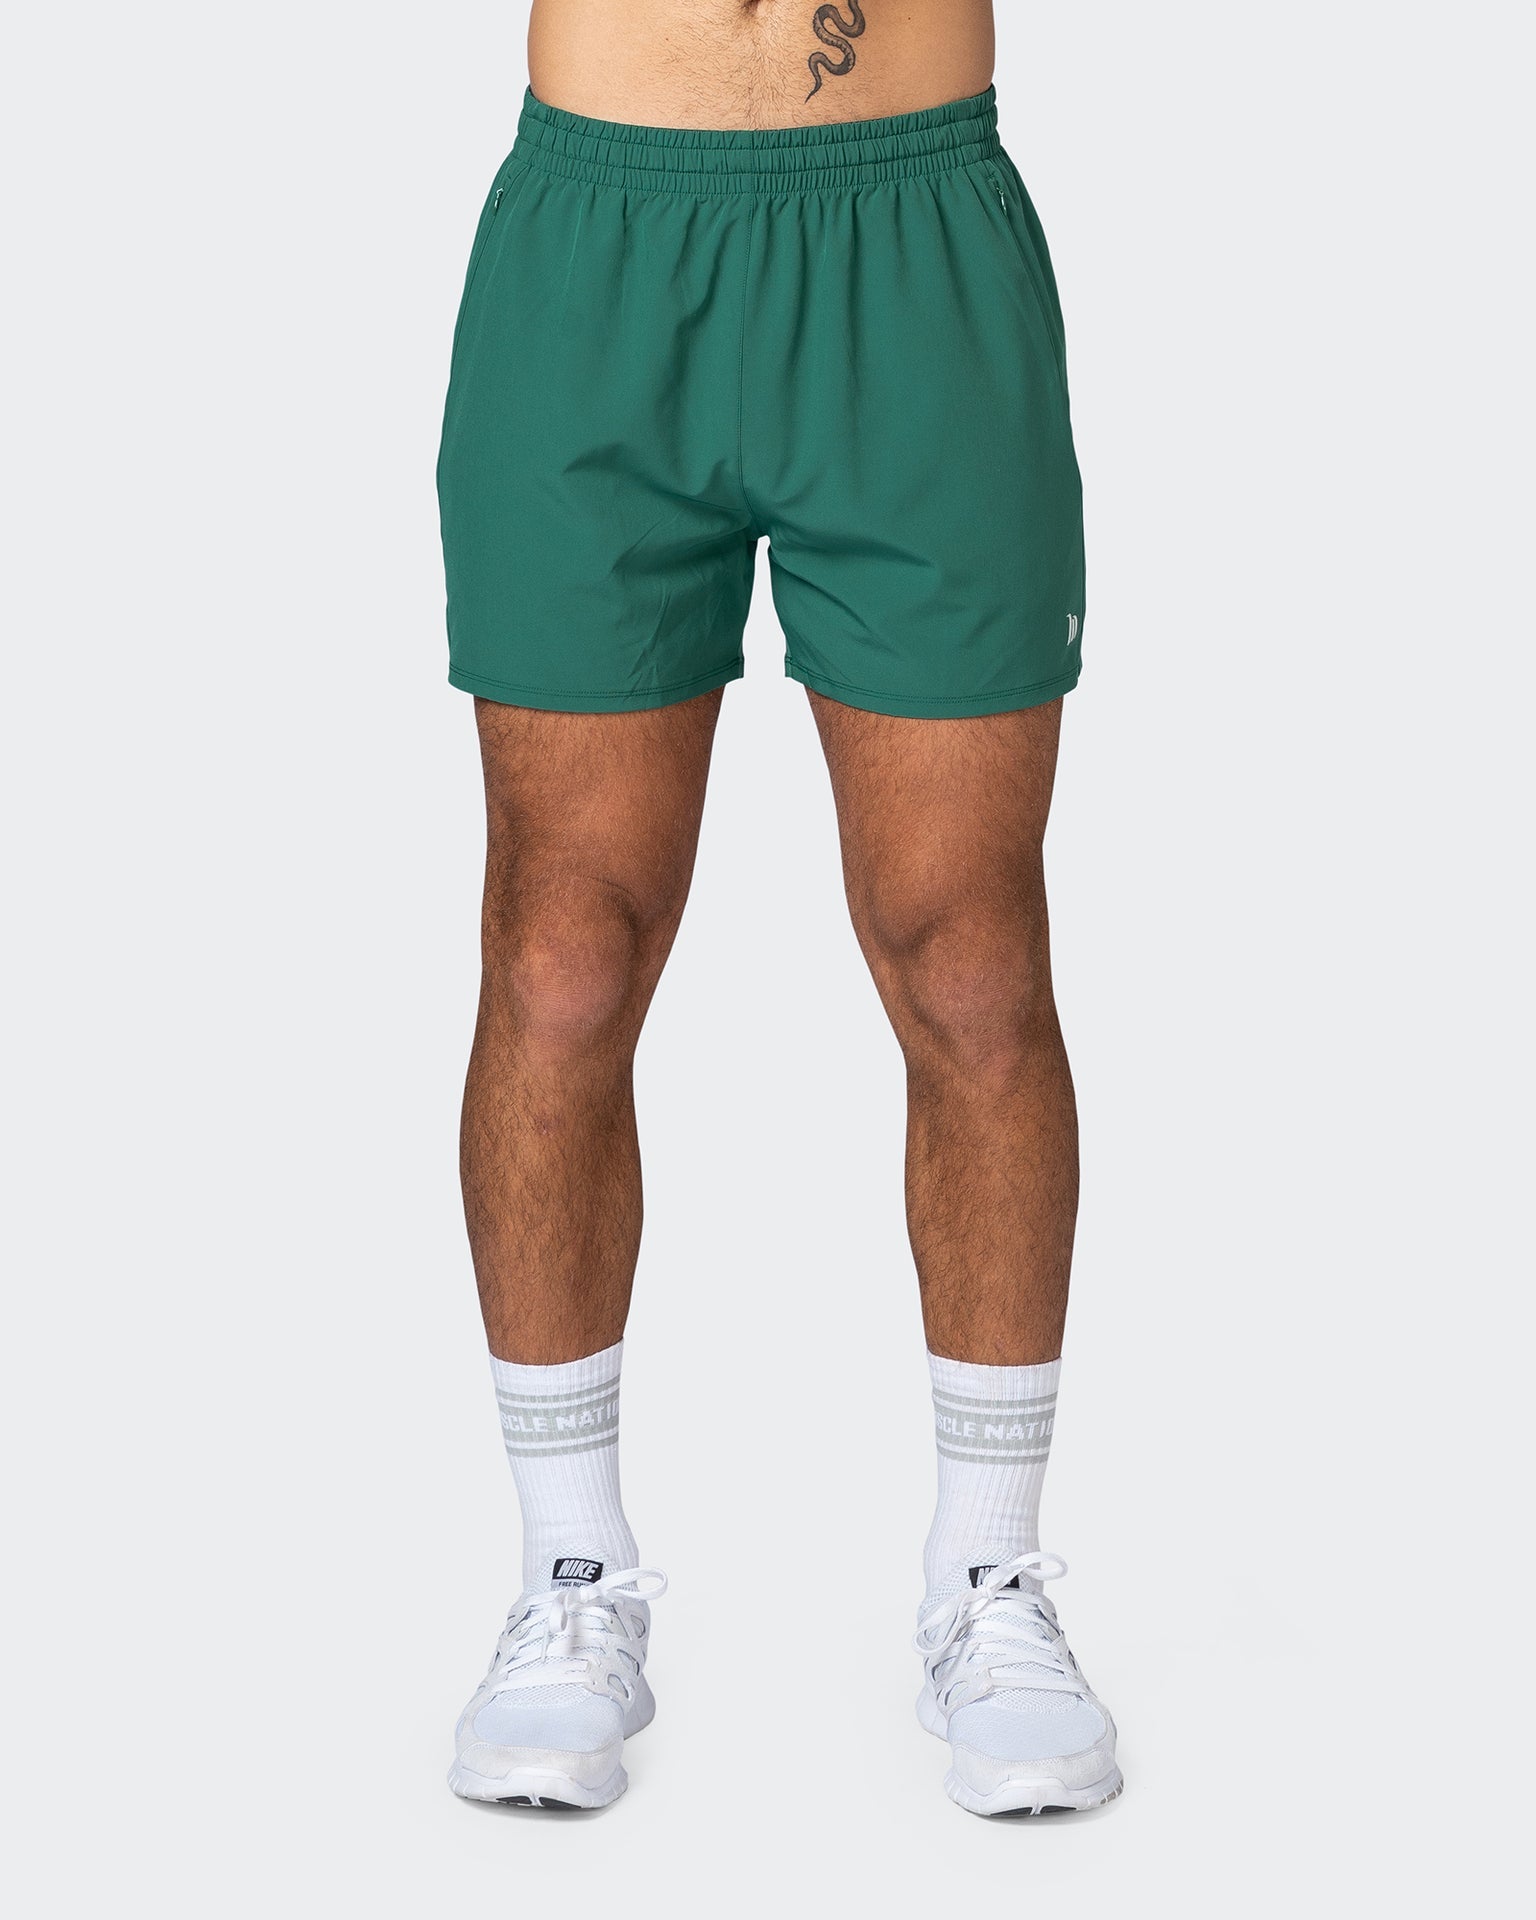 musclenation Shorts New Heights 4" Shorts - Antique Green